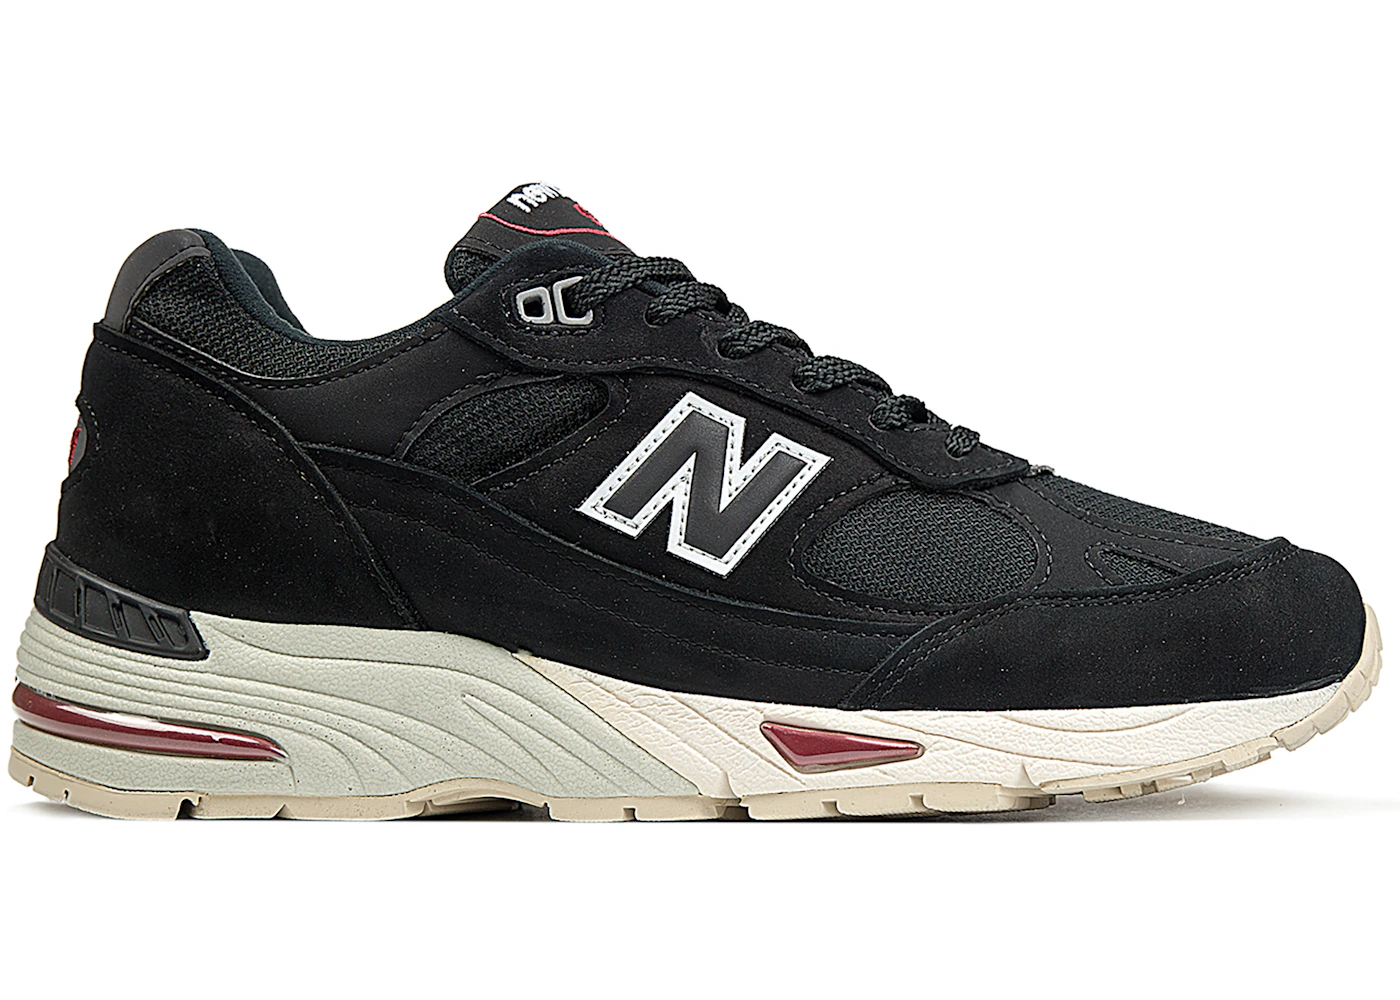 New Balance 991 Made in England Black Red メンズ - スニーカー - JP